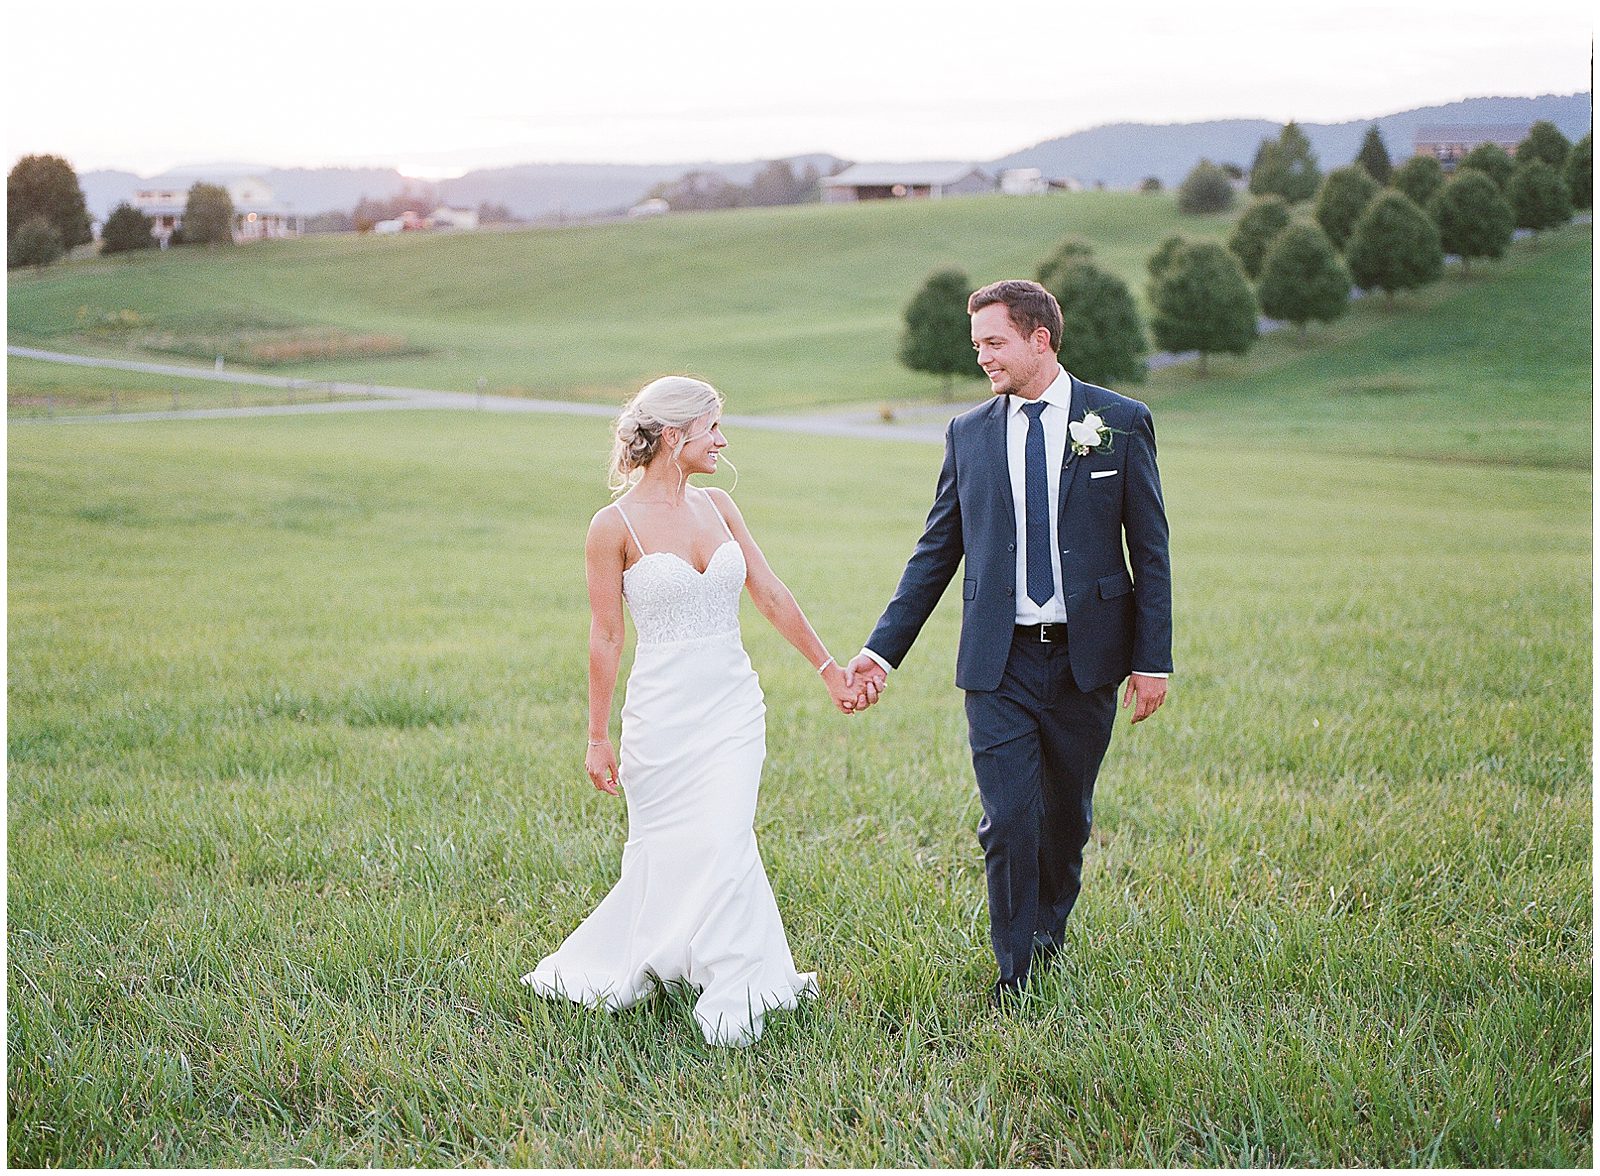 Bride and Groom Walking in Field Holding Hands Photo